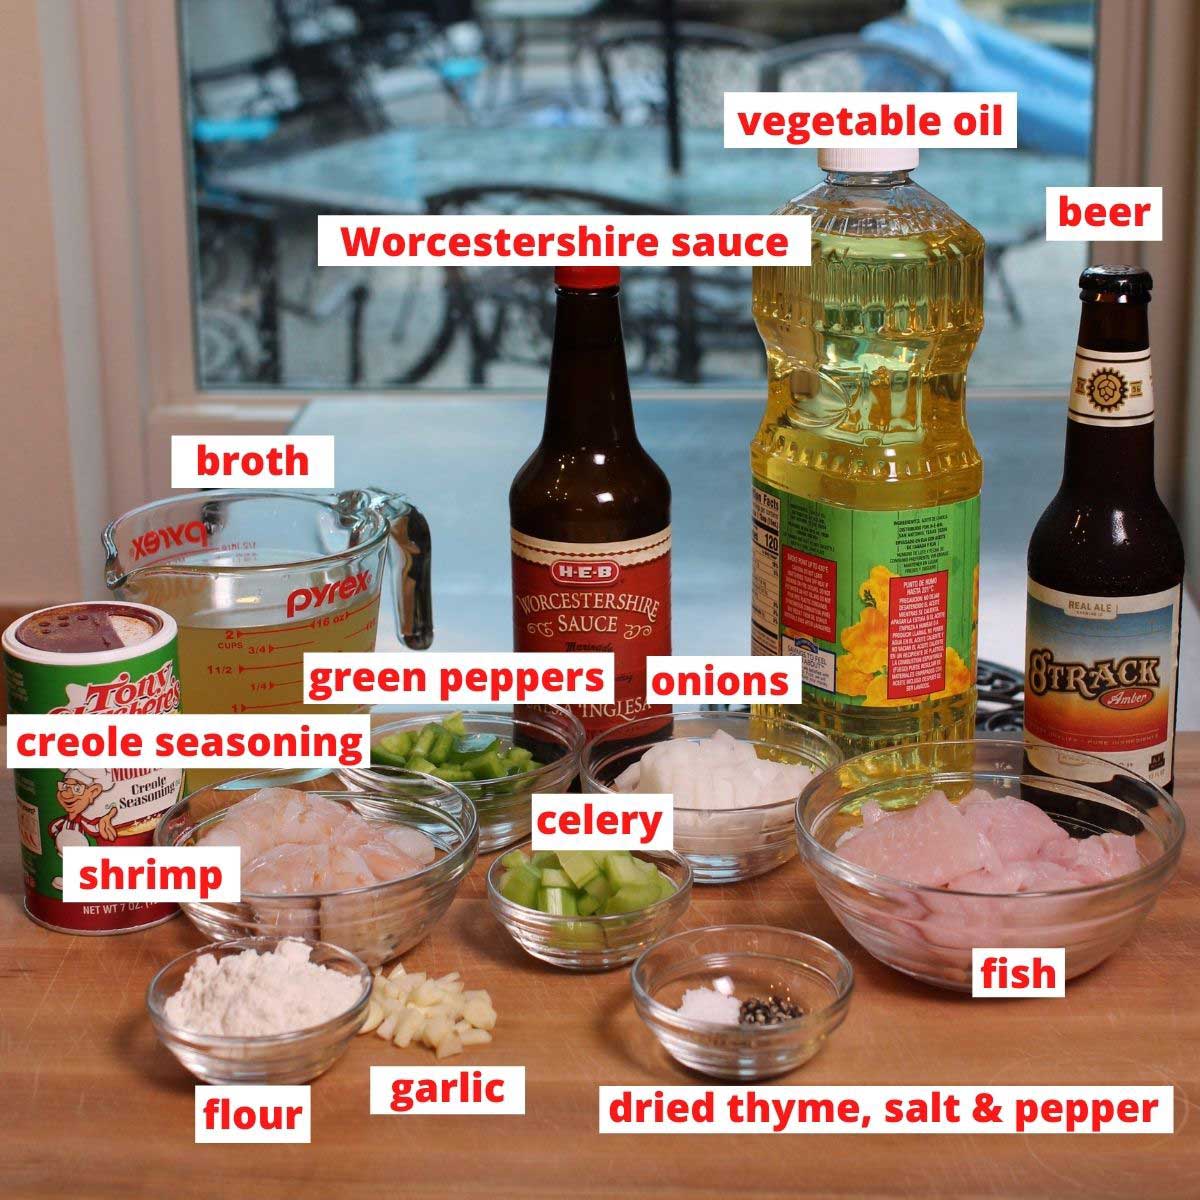 ingredients labeled for making gumbo on a brown table